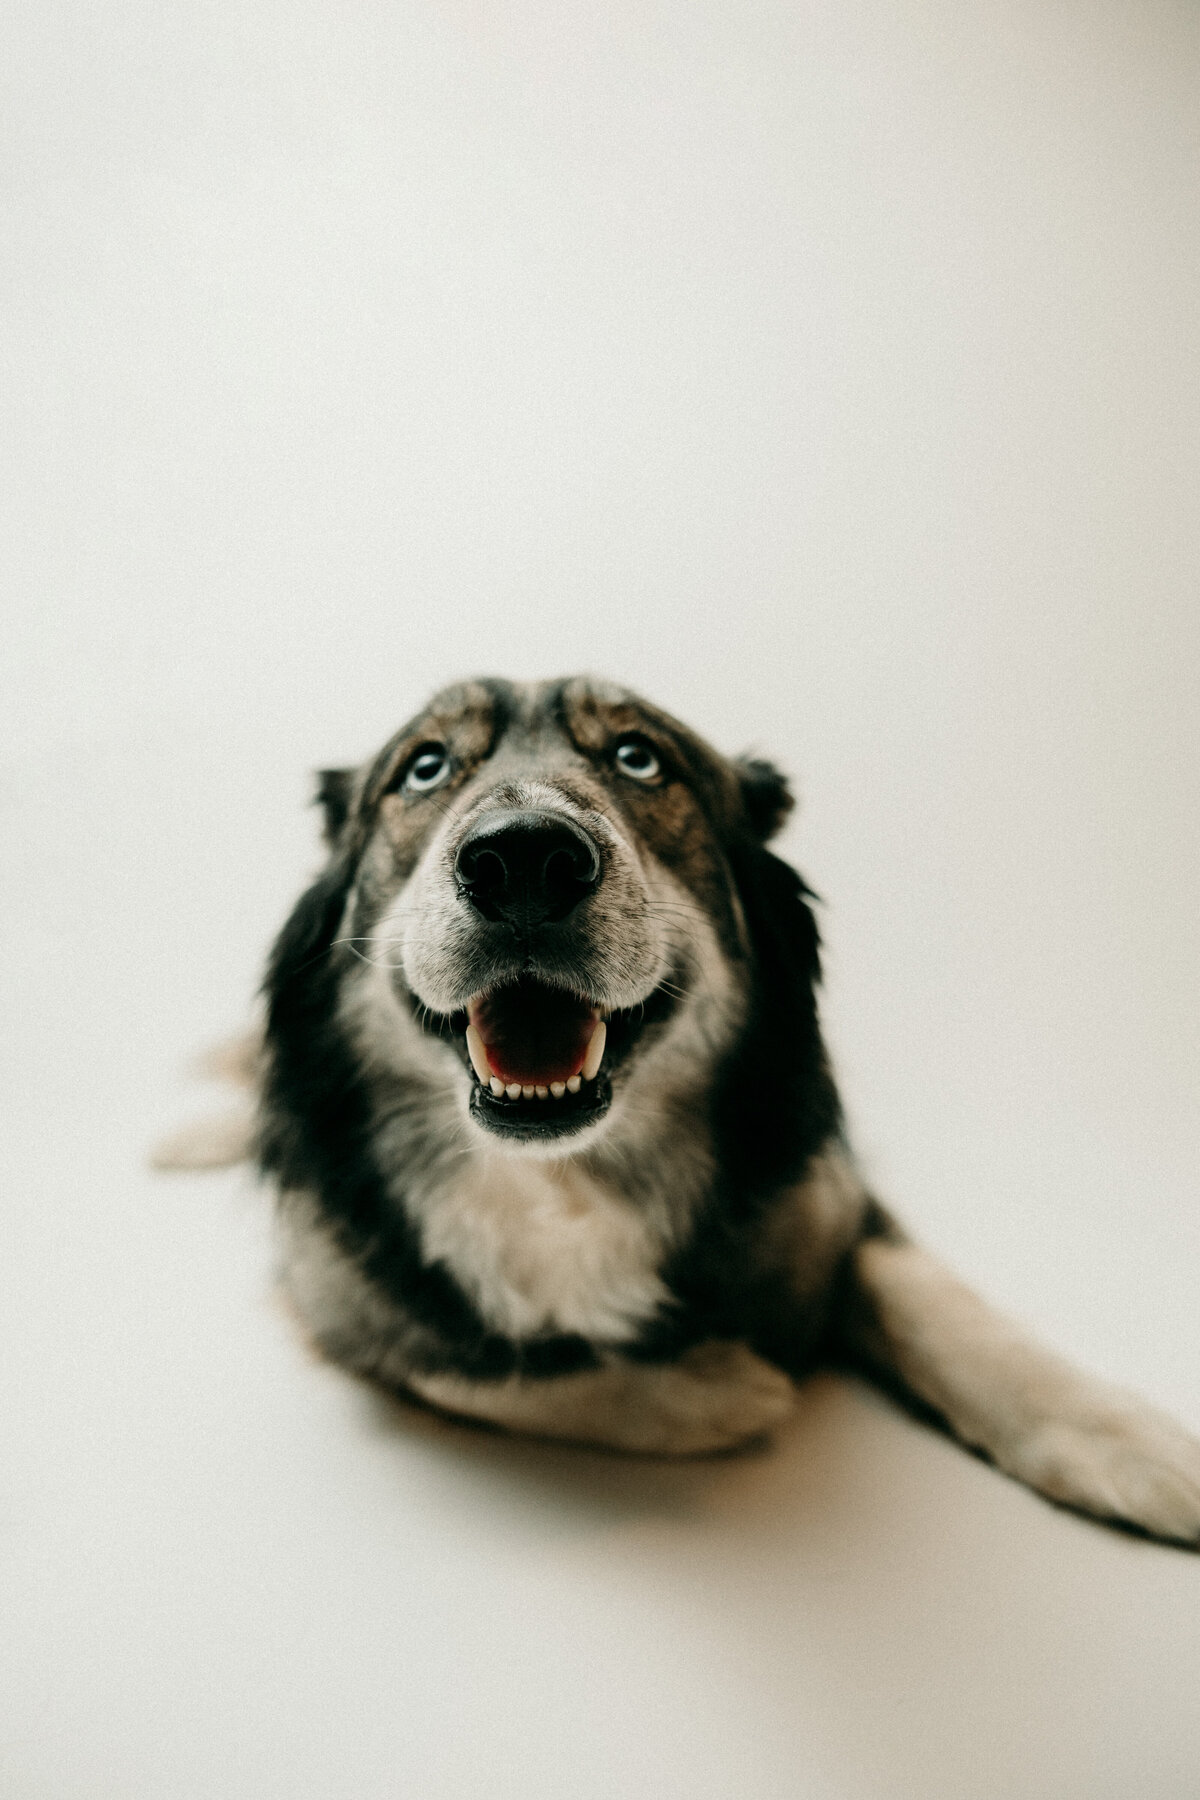 A husky lays down on a white backdrop smiling while looking up above.